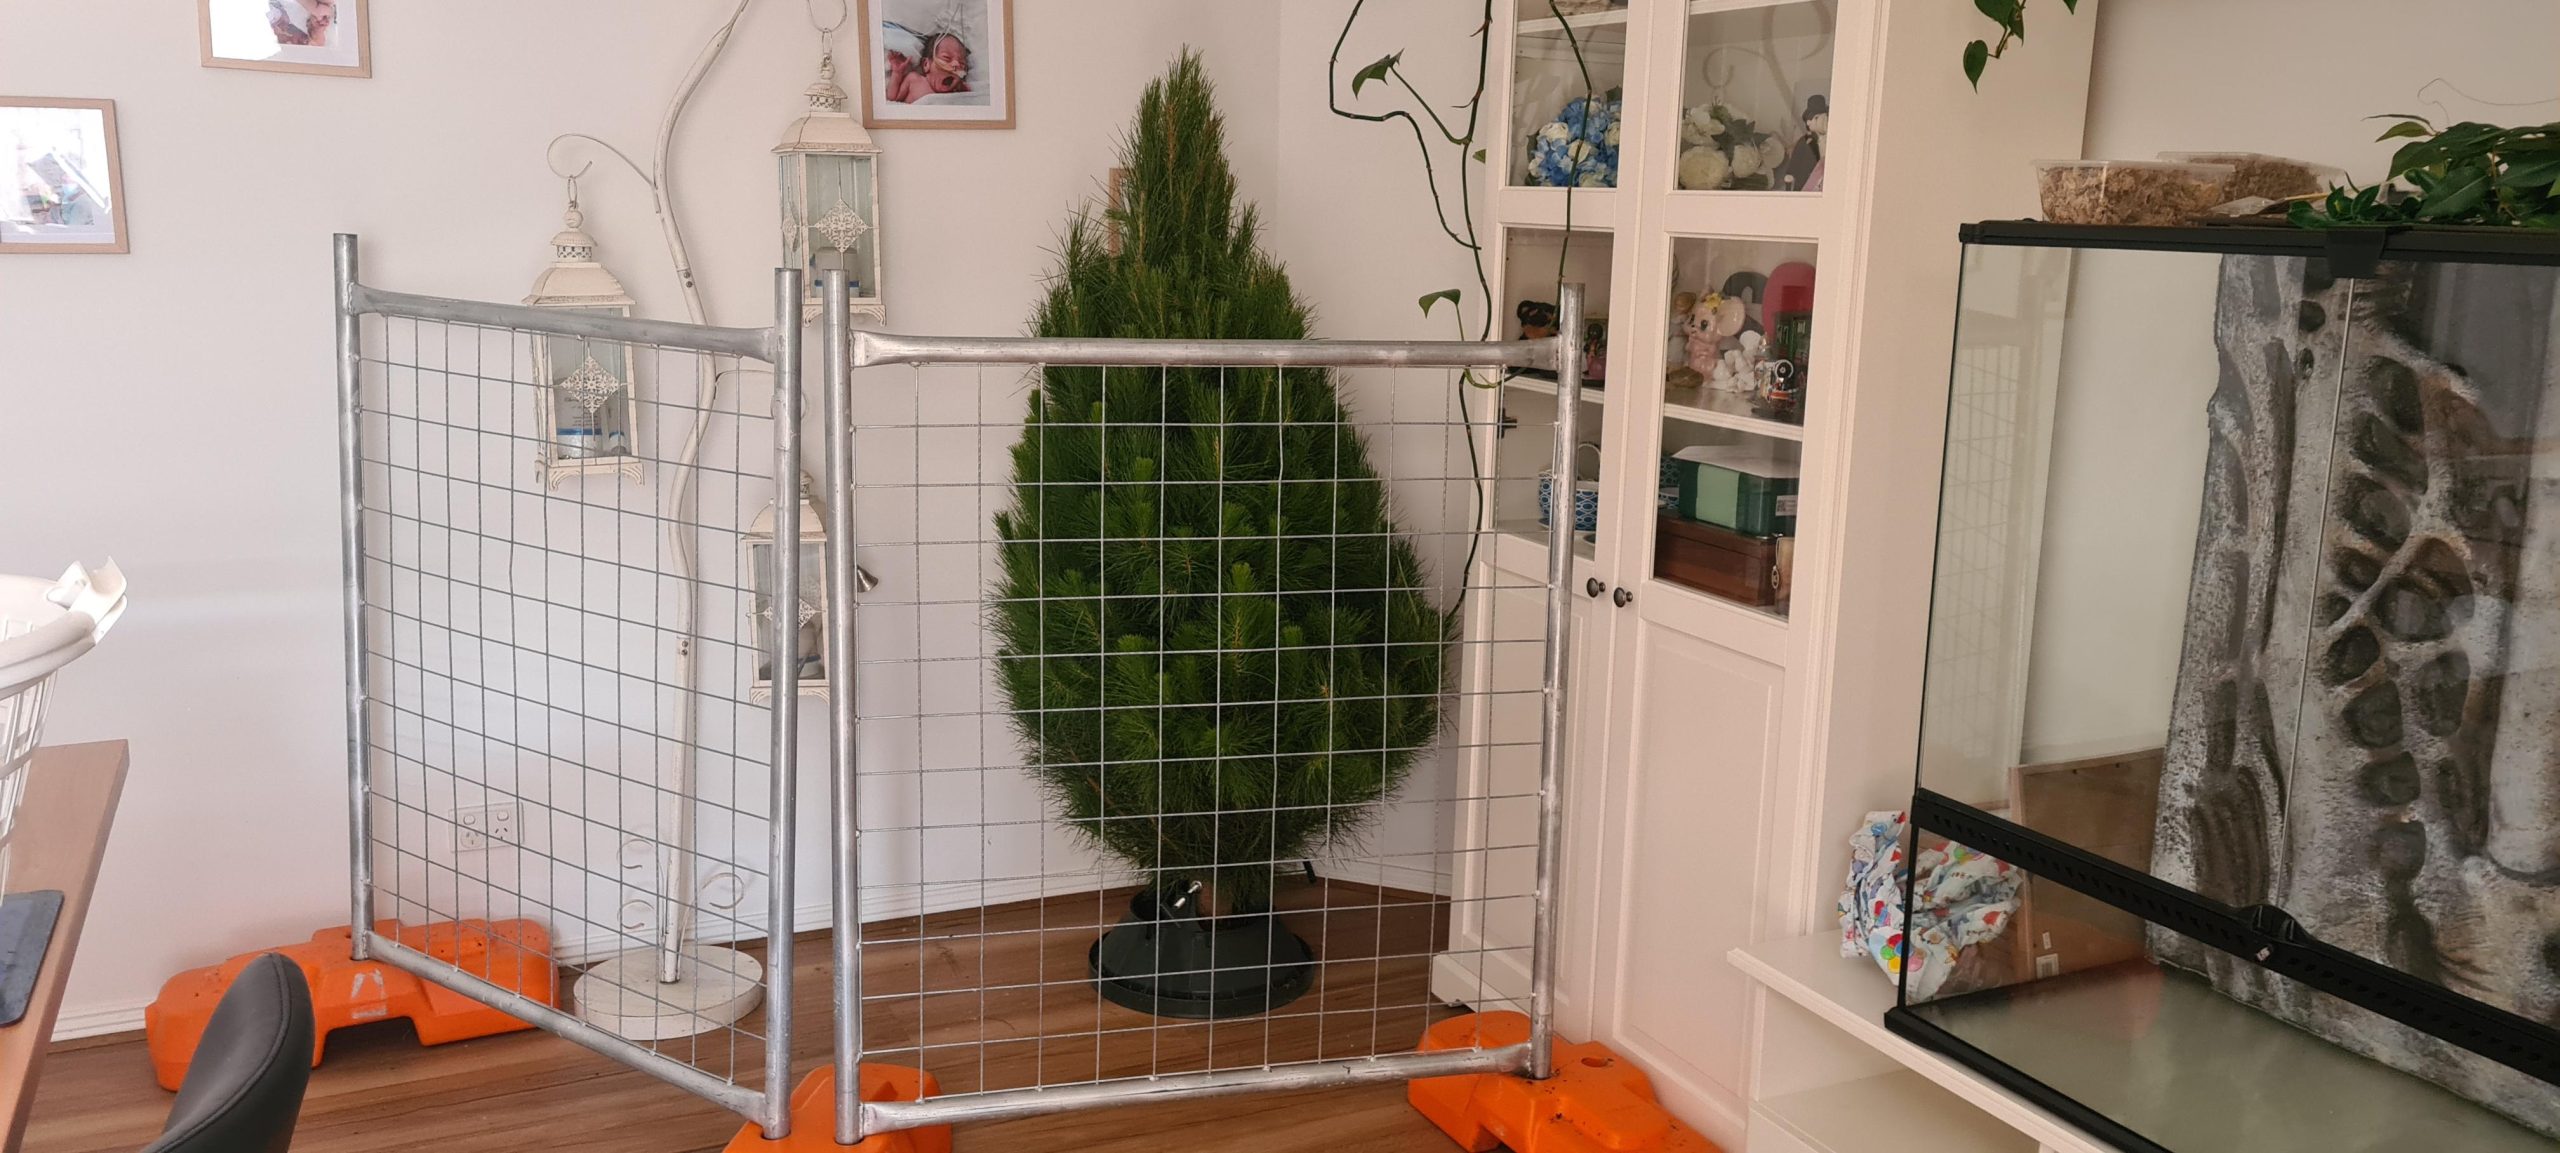 Toddler proofing the Christmas Tree strive 1